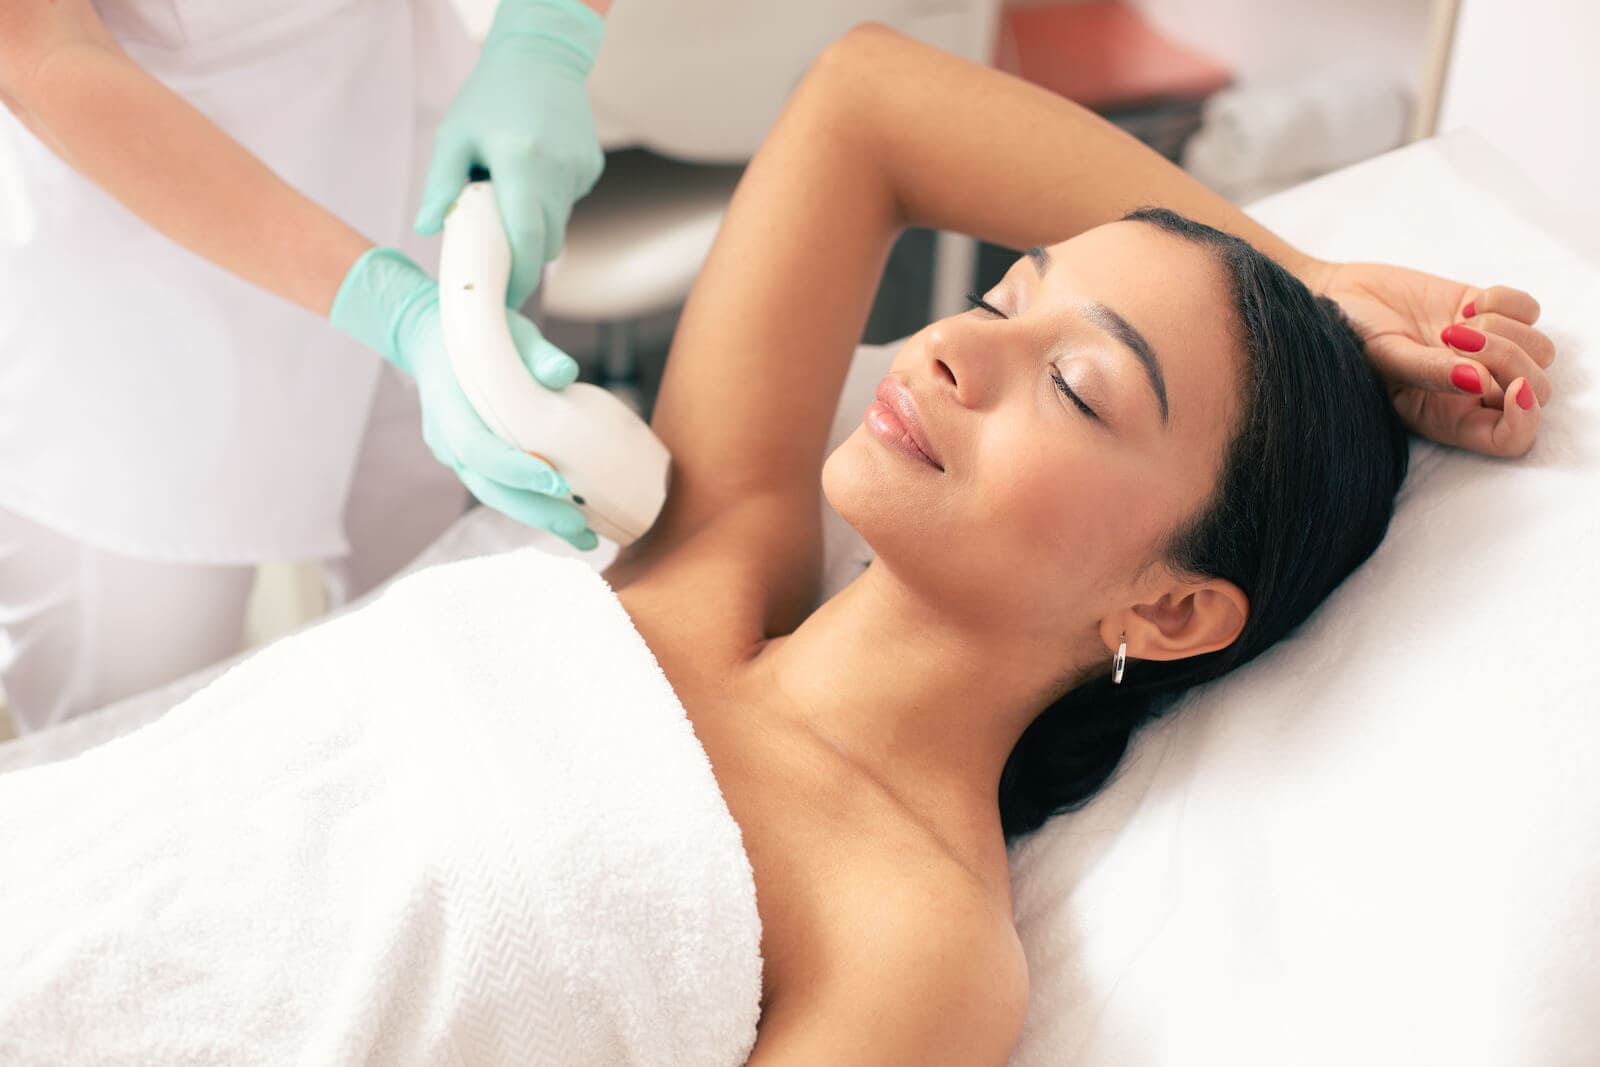 What Type Of Hair Responds Best To Laser Hair Removal Treatments?